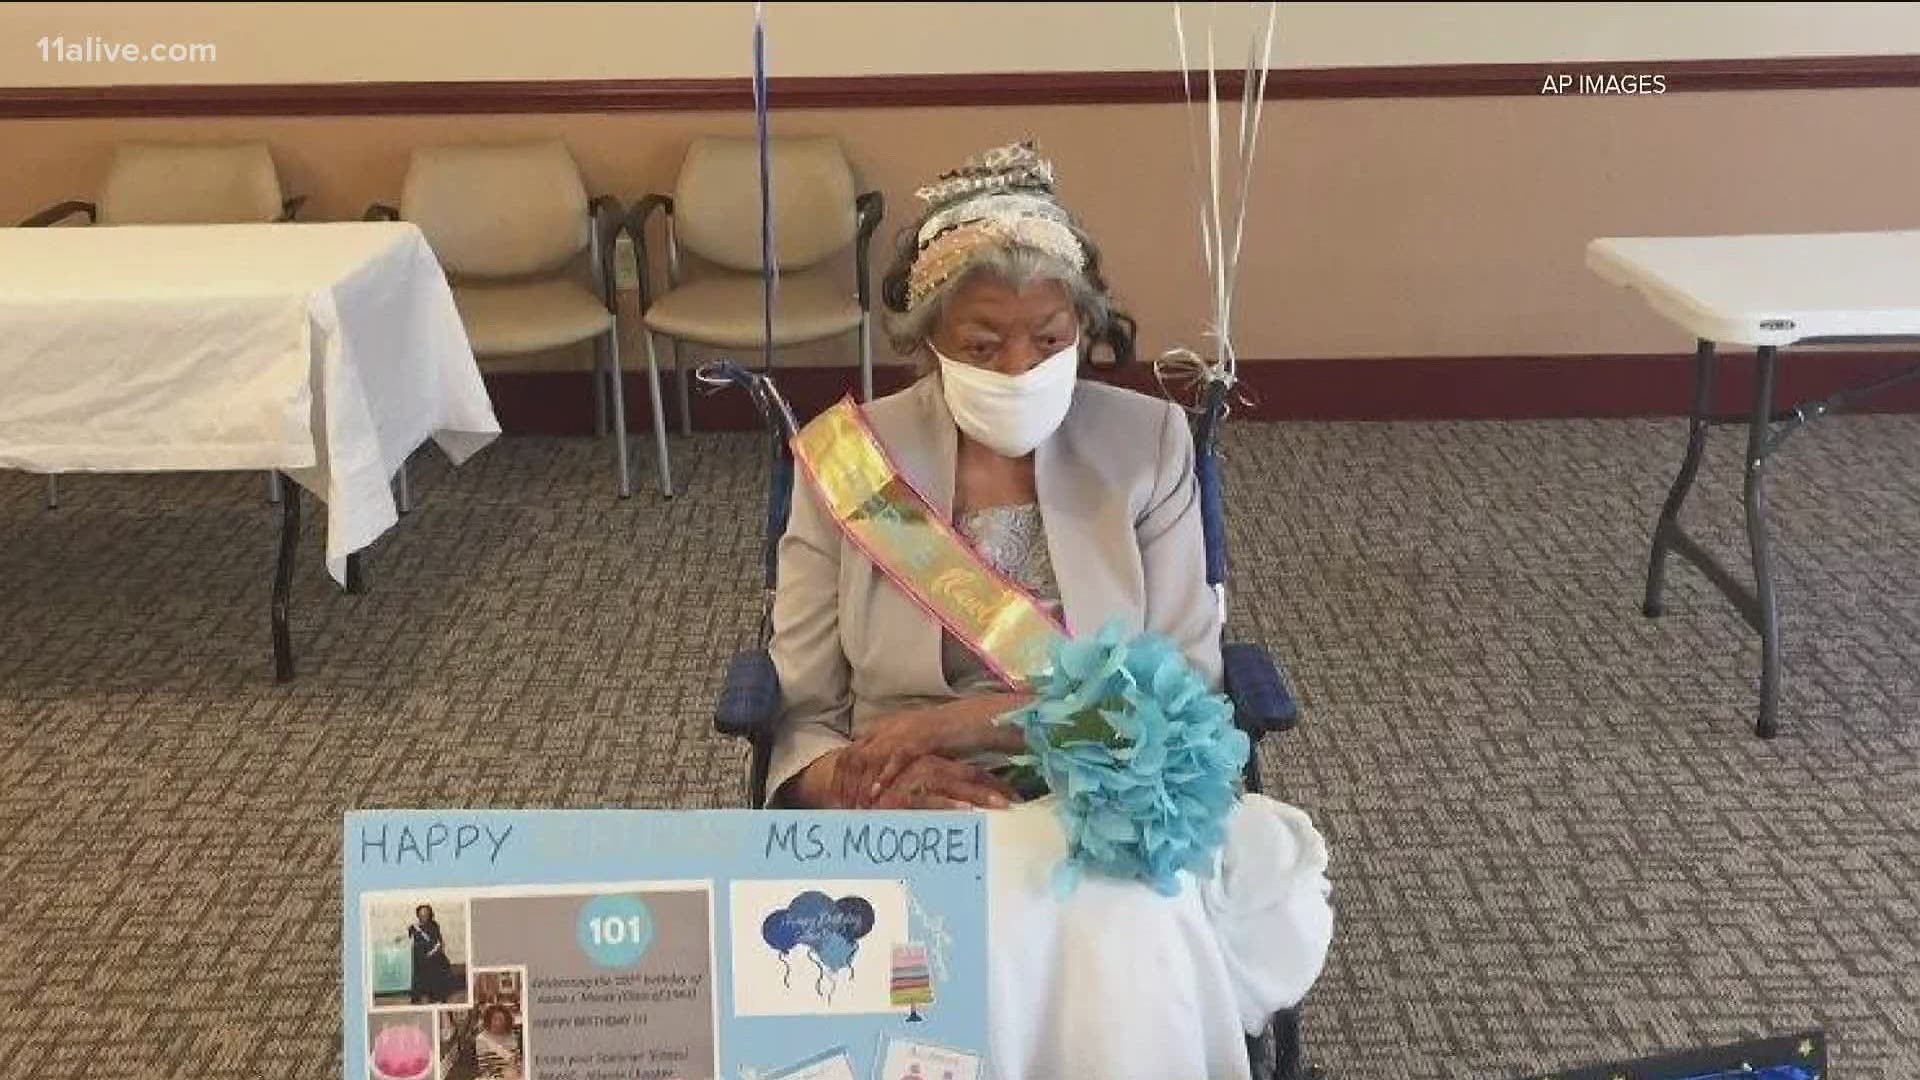 Annie Moore turned 101 on Sept. 20 and was greeted by air hugs through the window of the home.